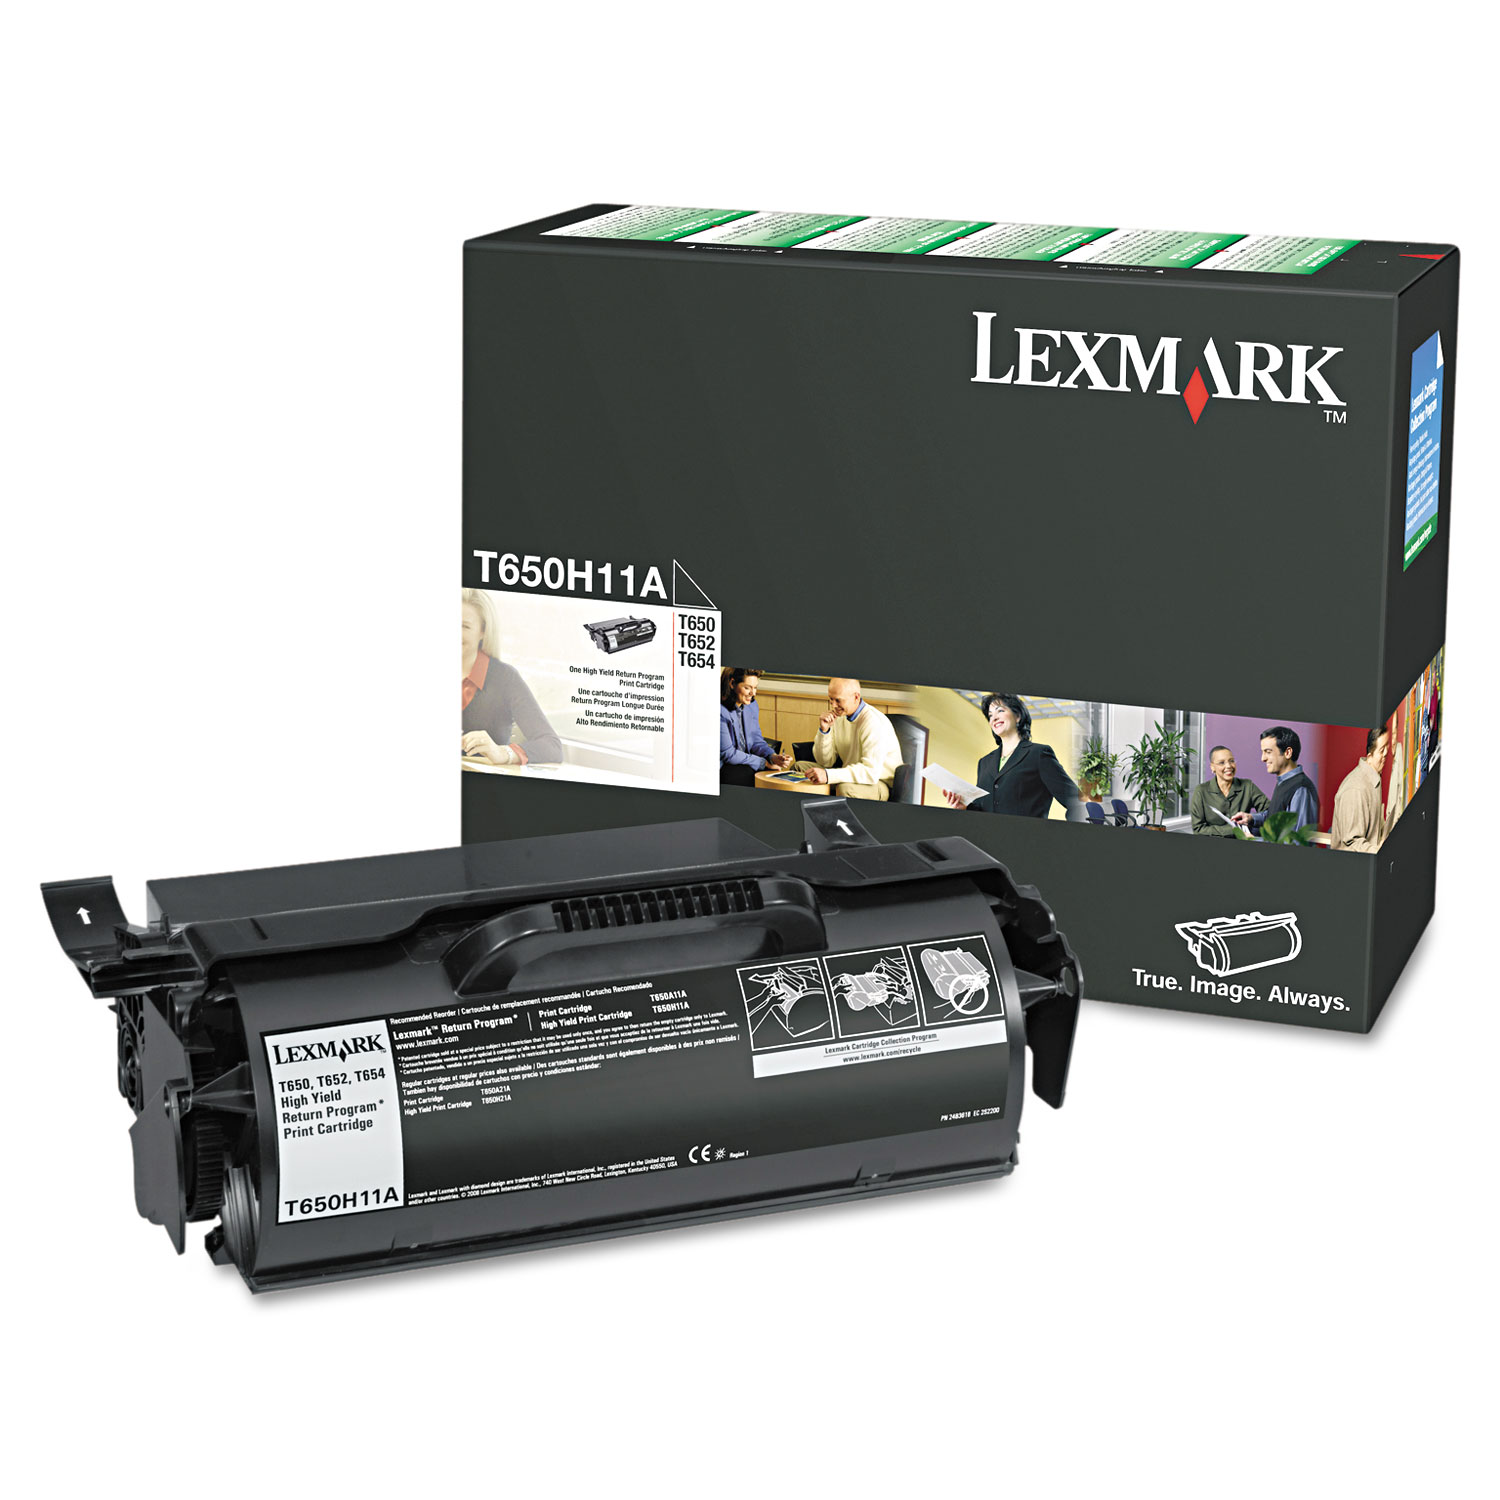 Lexmark LEXT650H11A T650H11A High-Yield Toner, 25000 Page-Yield, Black